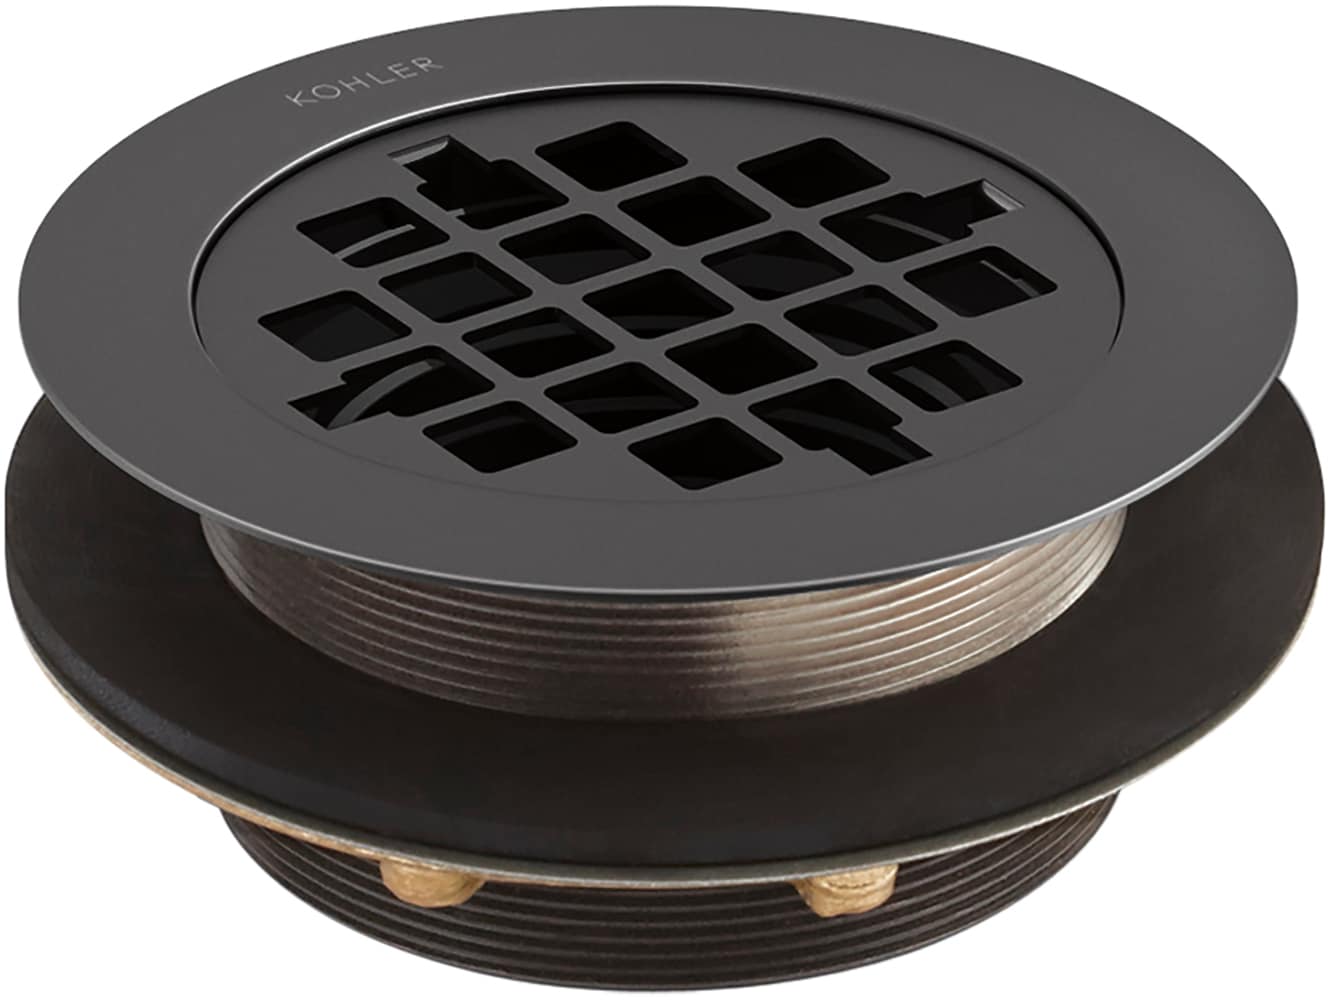 Shower Drain Cover, Brass Construction, 4-1/4 inches outside diameter (Oil  Rubbed Bronze), 5 H 0.25 L 5 W - Kroger